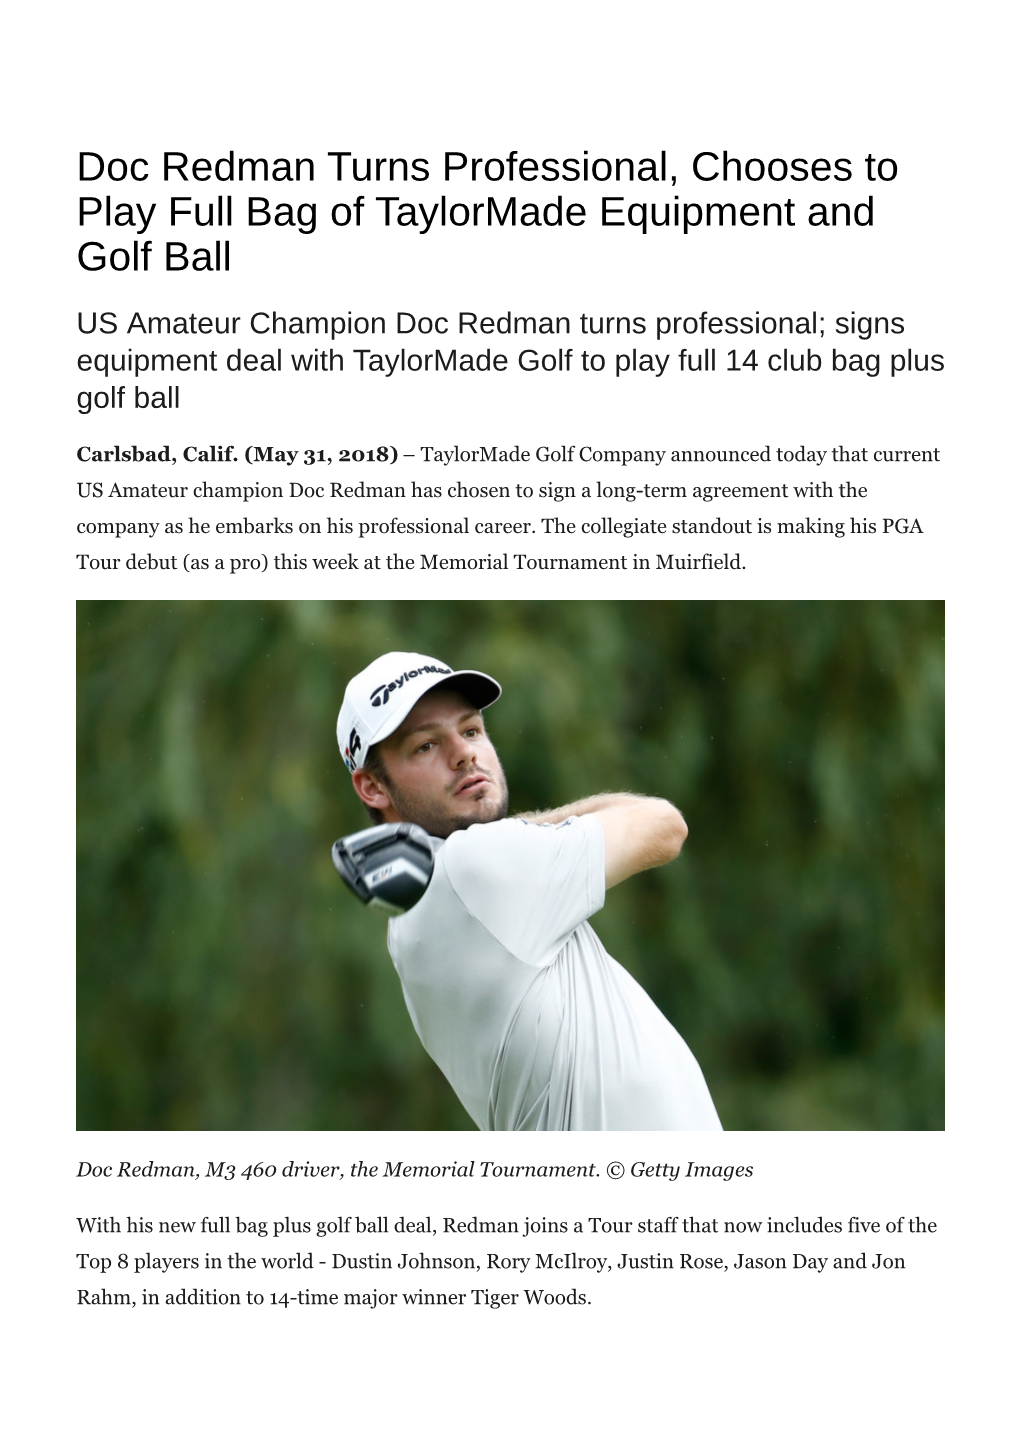 Doc Redman Turns Professional, Chooses to Play Full Bag of Taylormade Equipment and Golf Ball